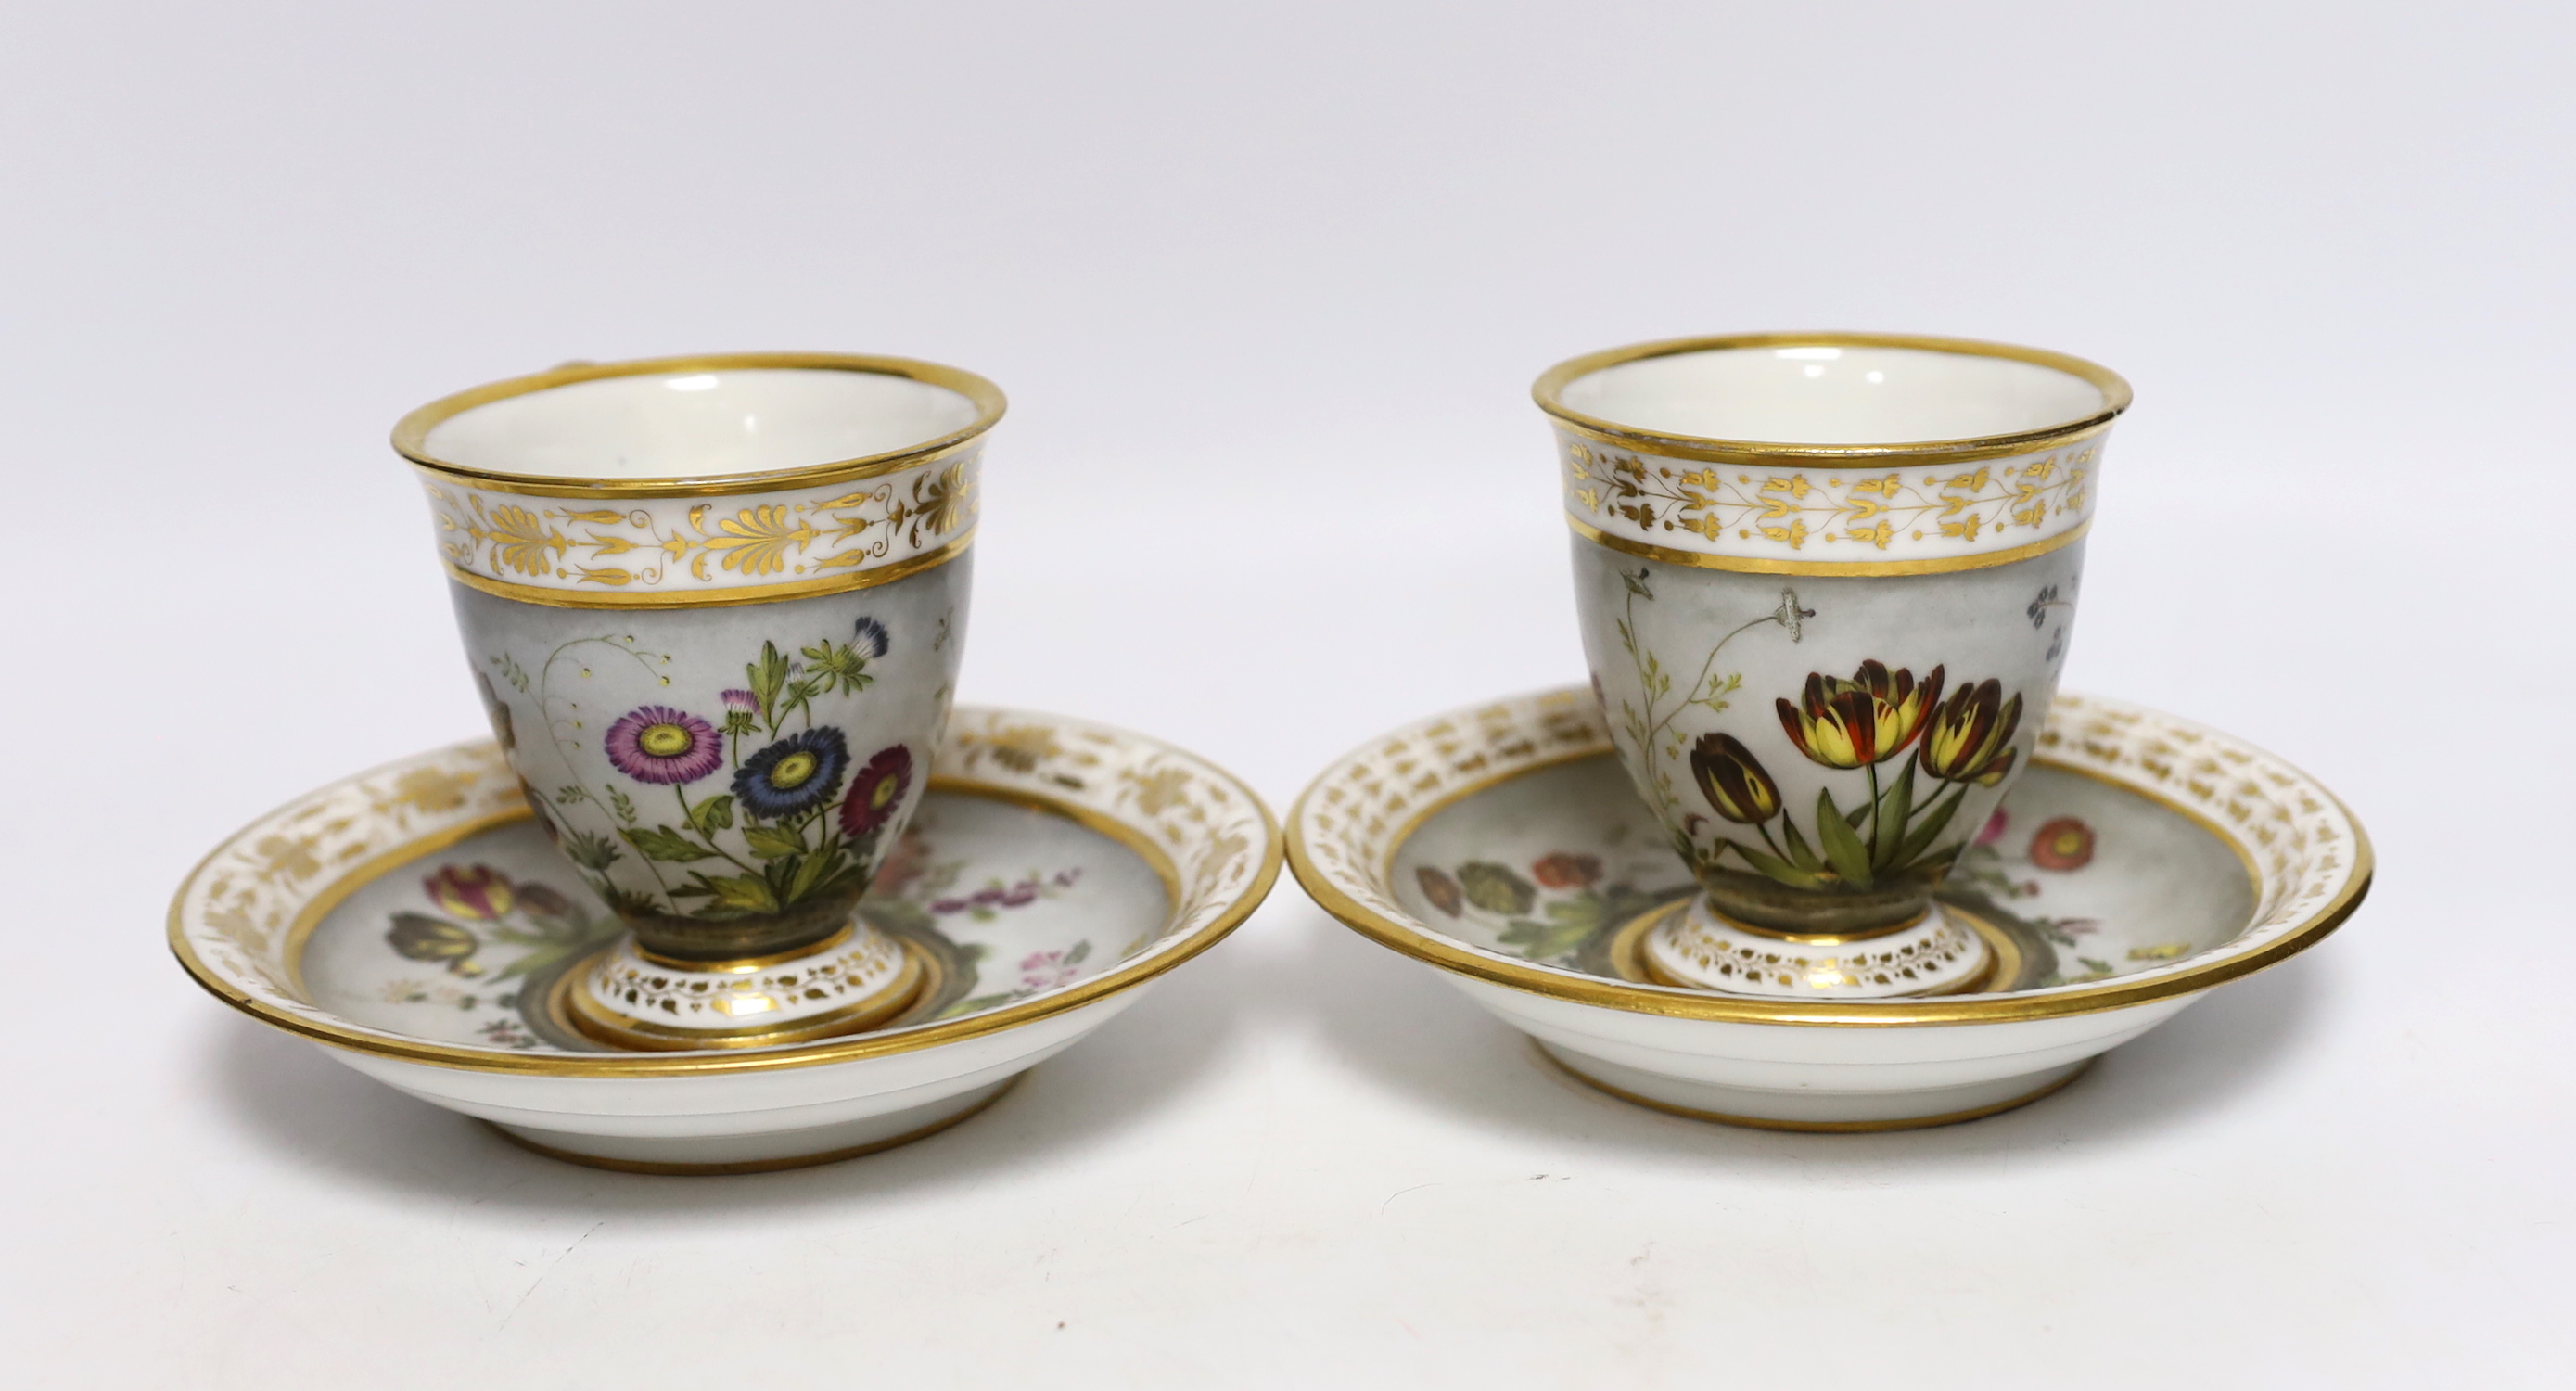 A pair of early 19th century Paris porcelain botanical cups and saucers, one signed Dihl, 9cm high